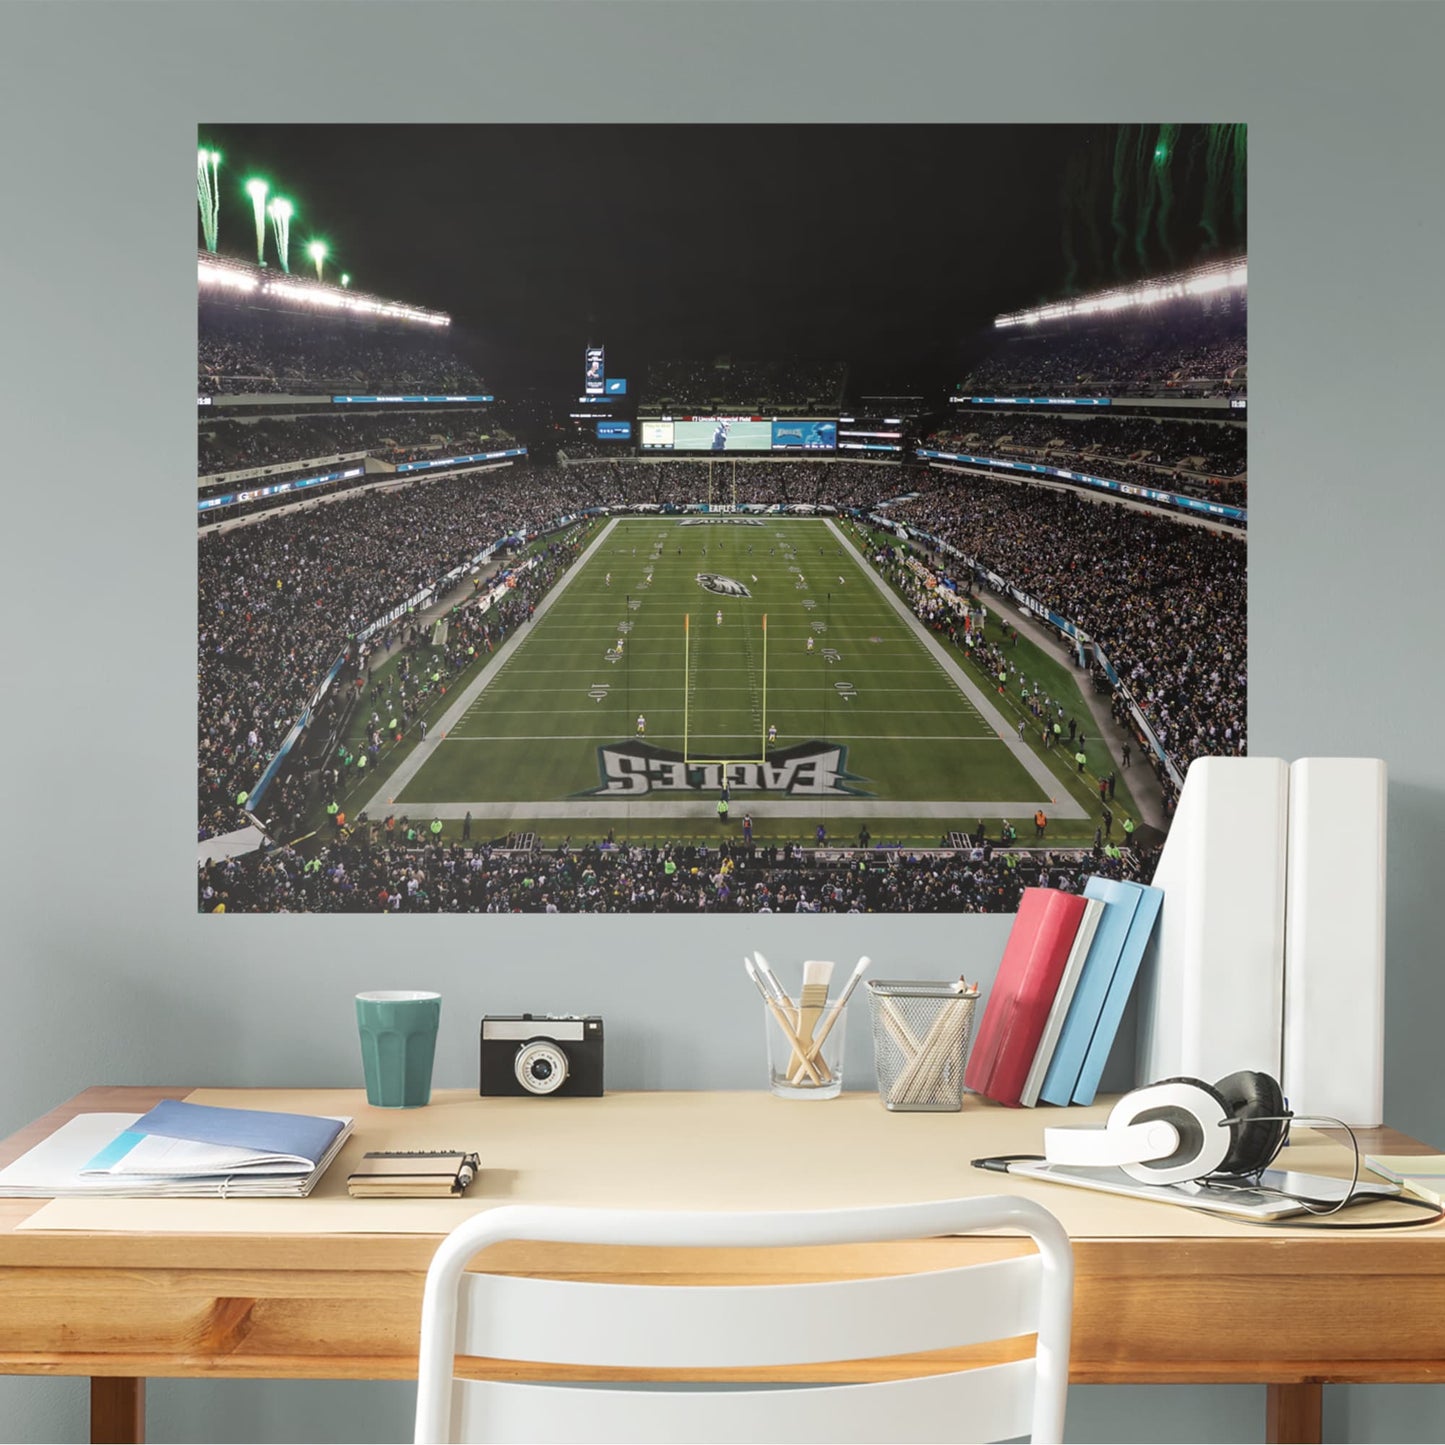 Philadelphia Eagles: Lincoln Financial Field Endzone View Mural        - Officially Licensed NFL Removable Wall   Adhesive Decal